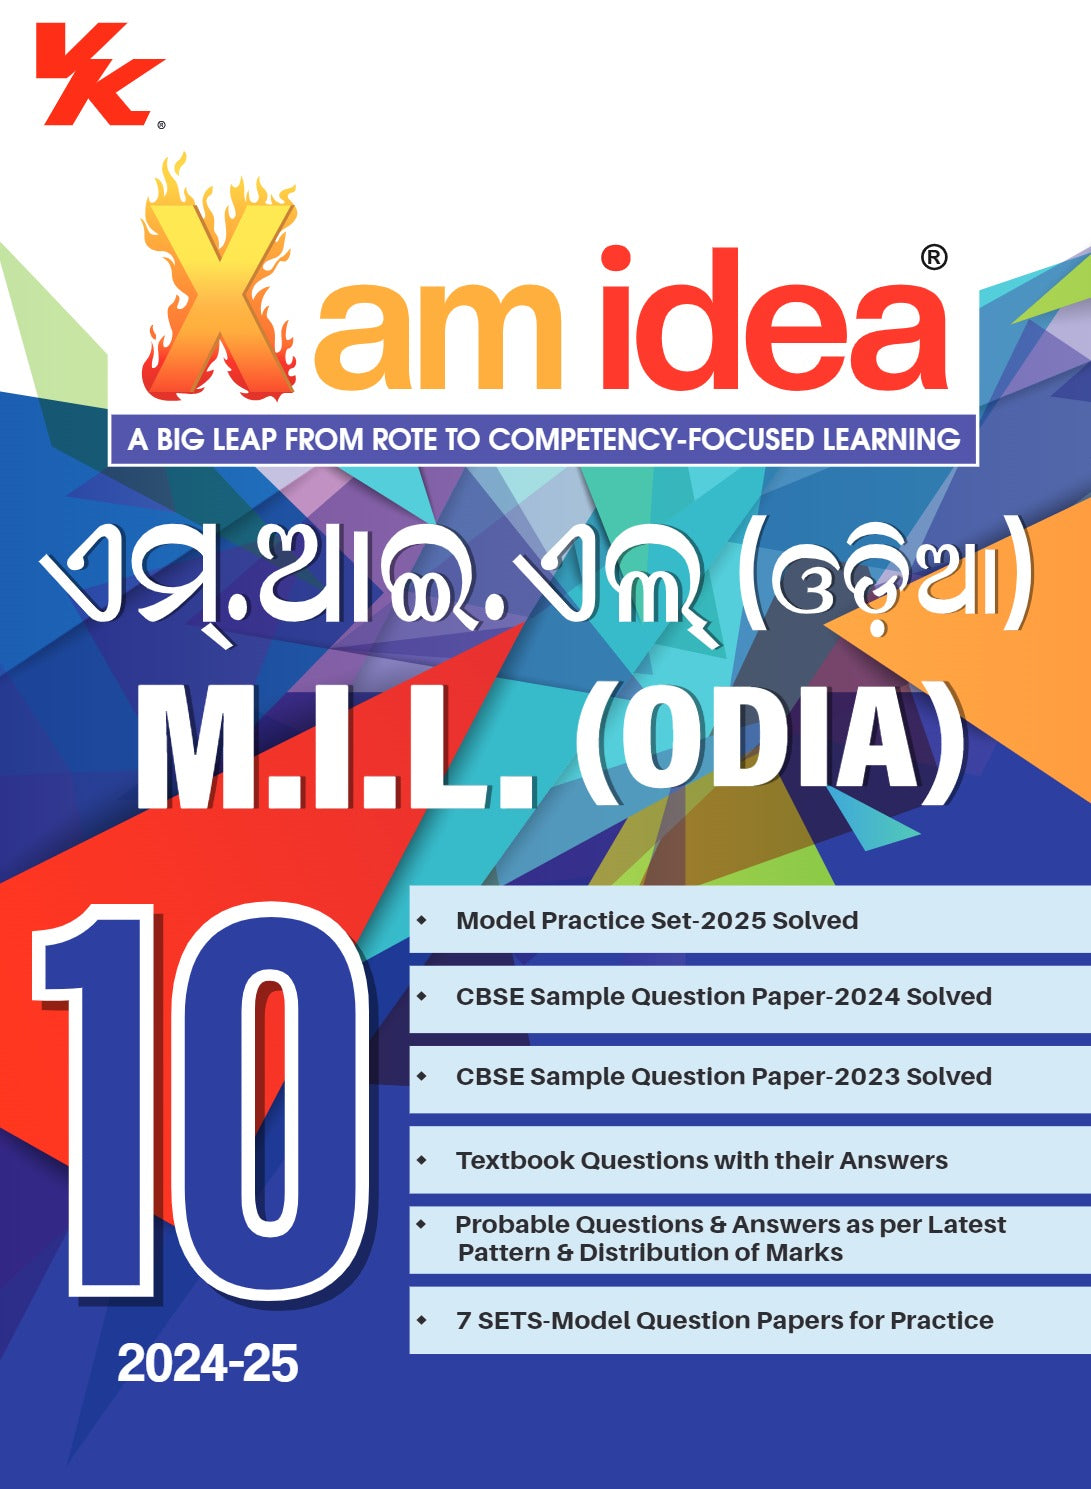 Xam idea M.I.L (ODIA) Class 10 Book | CBSE Board | Chapterwise Question Bank | Based on Revised CBSE Syllabus | NCERT Questions Included | 2024-25 Exam